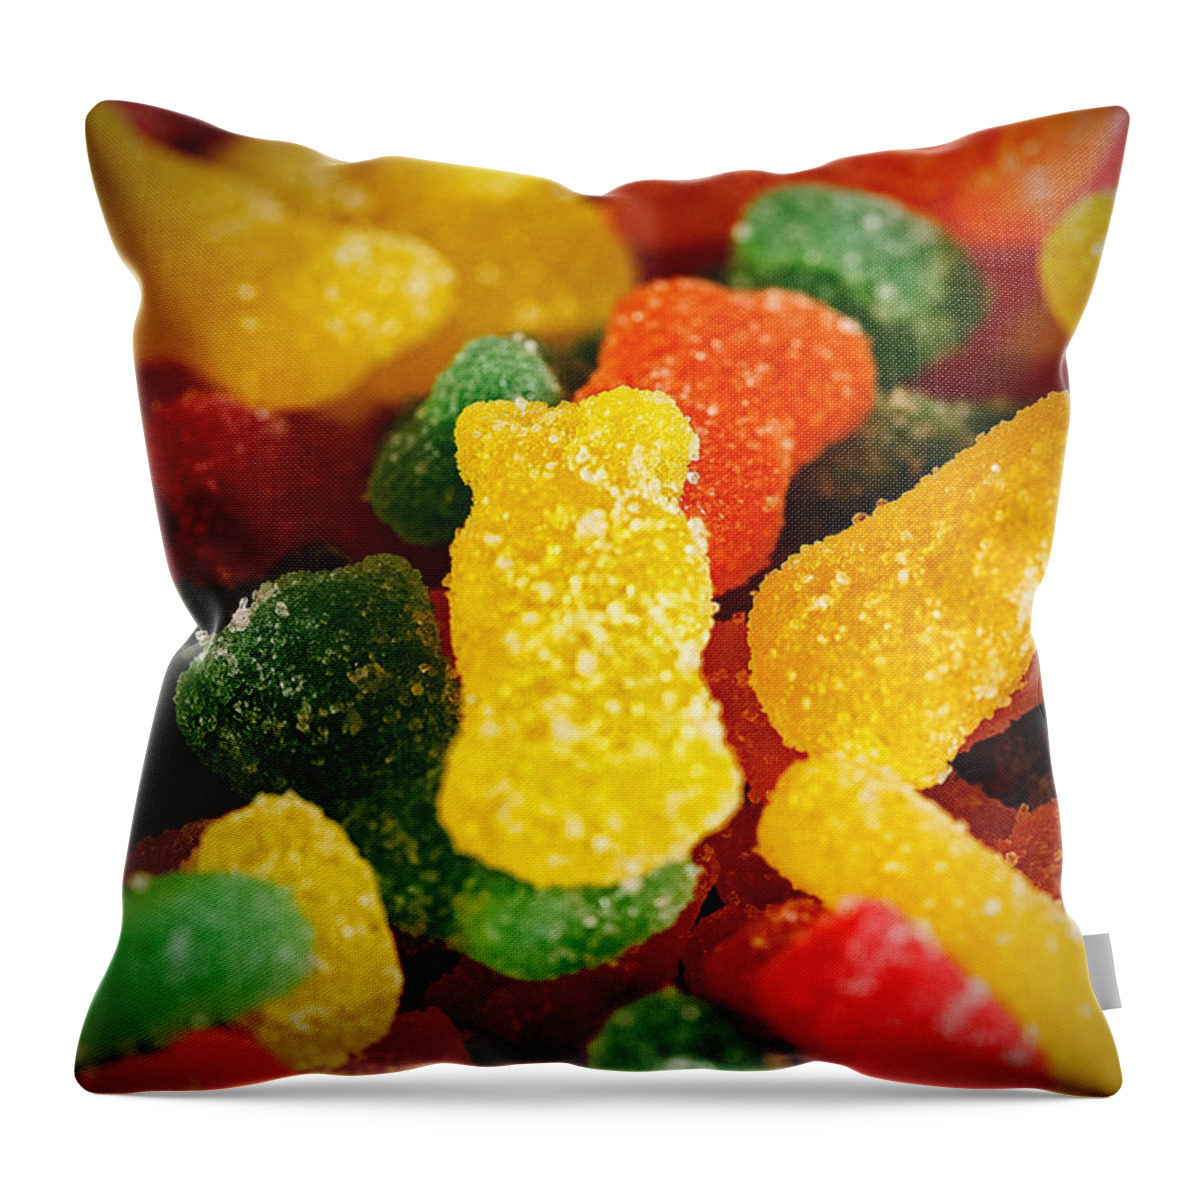 Candy Throw Pillow featuring the photograph Sour Bears by Rick Berk